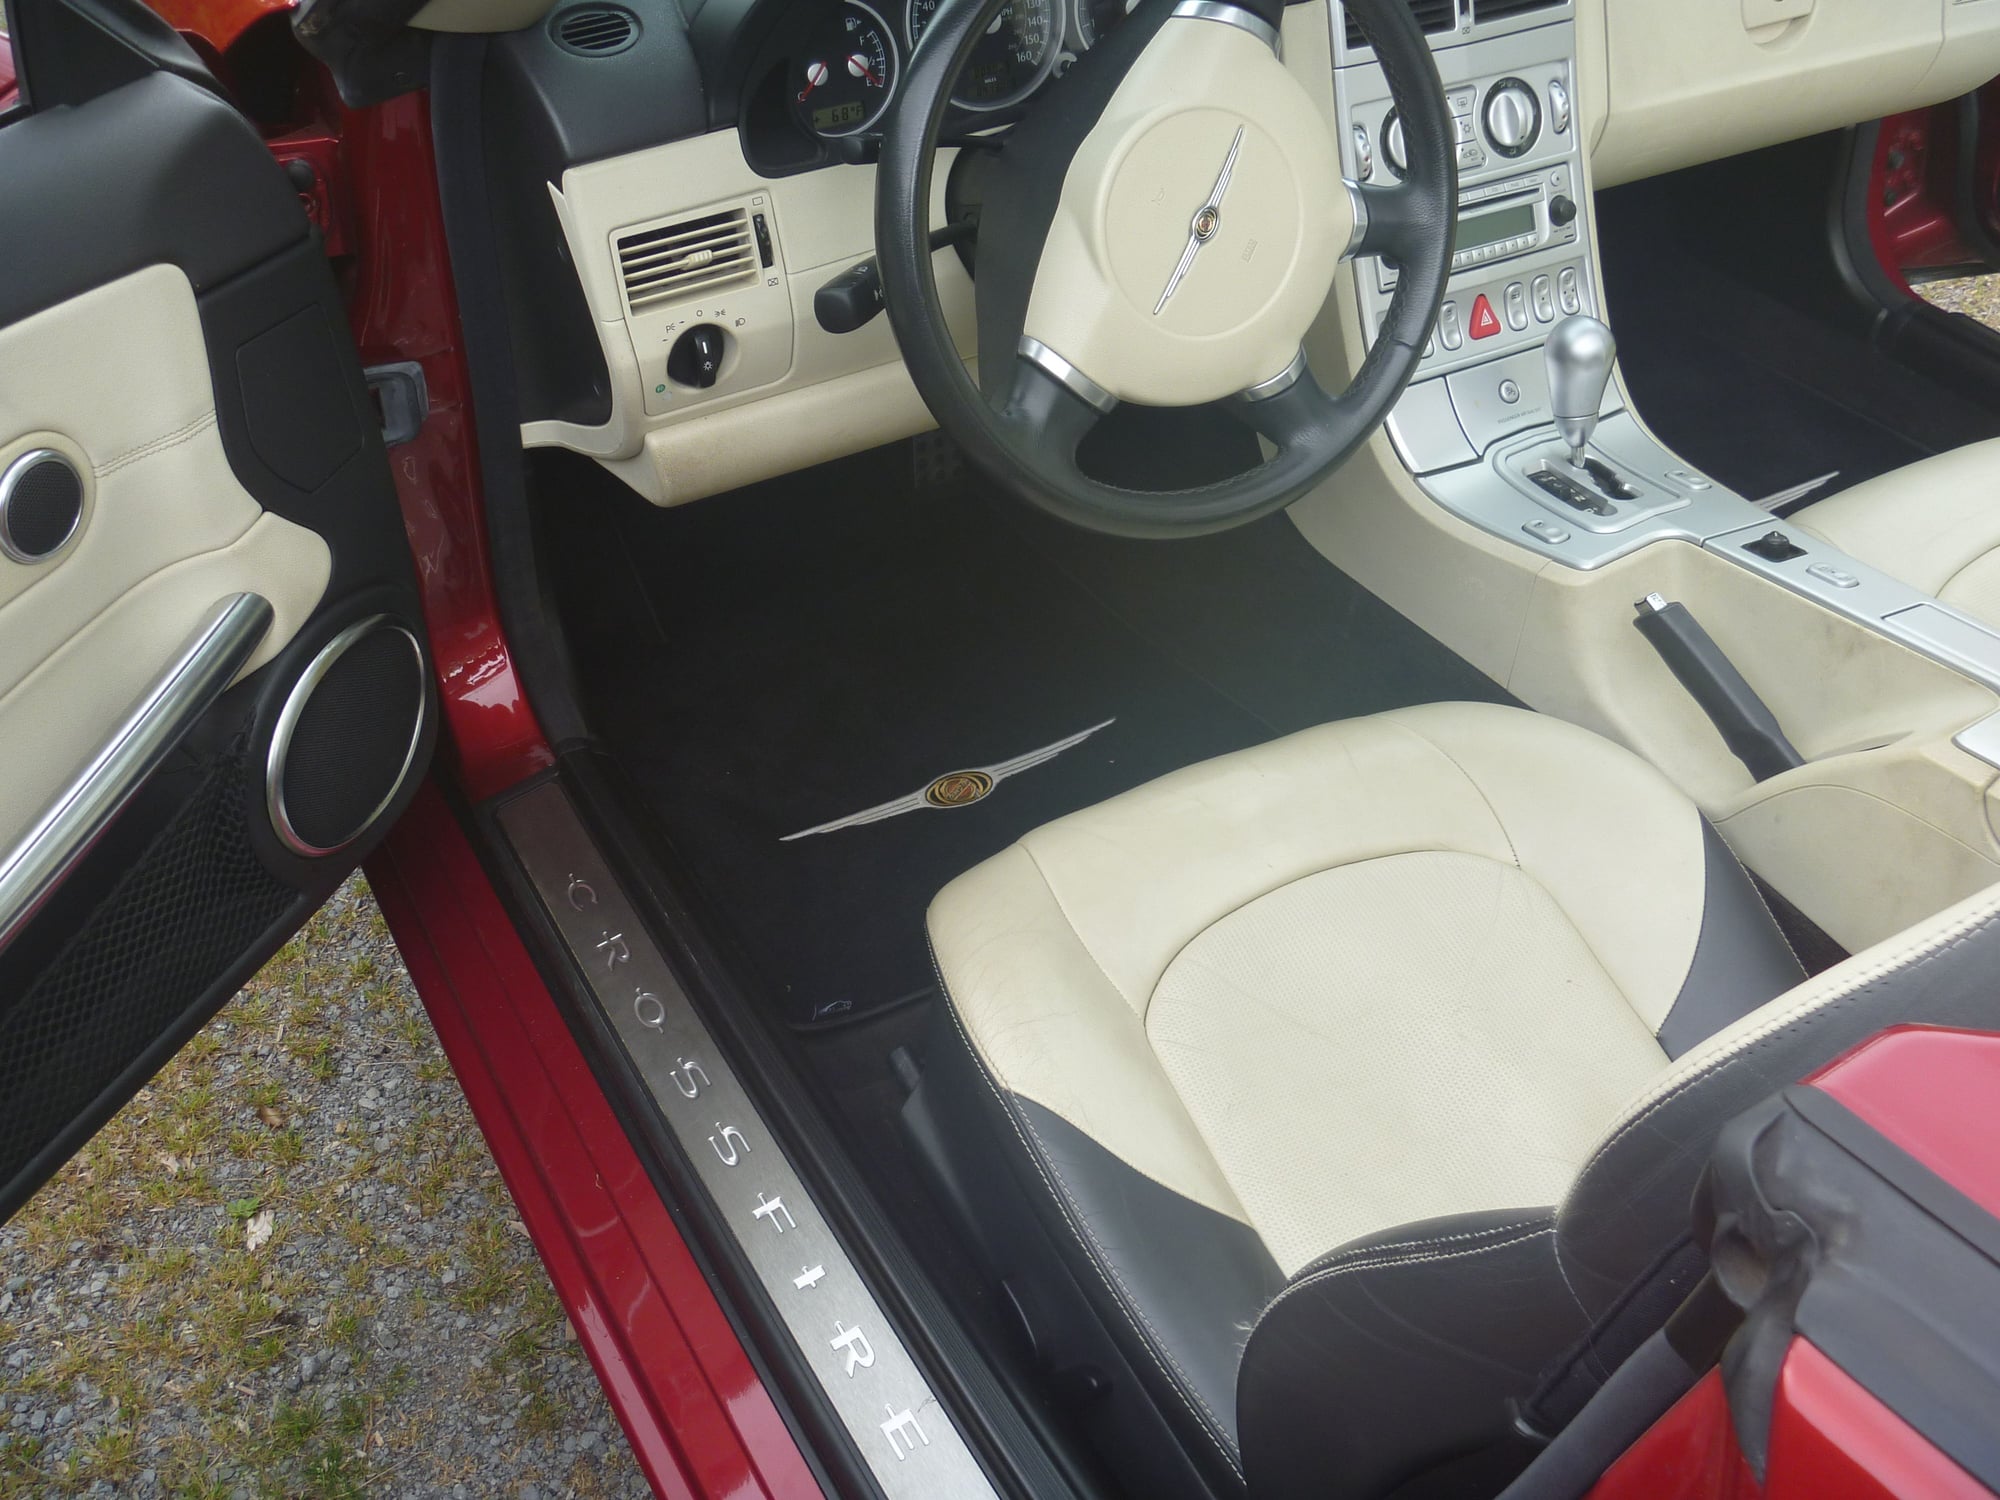 2006 Chrysler Crossfire - 2006 Crossfire Limited Roadster - Used - VIN 1C3AN65L46X064199 - 6 cyl - 2WD - Automatic - Convertible - Red - Avon, NY 14414, United States